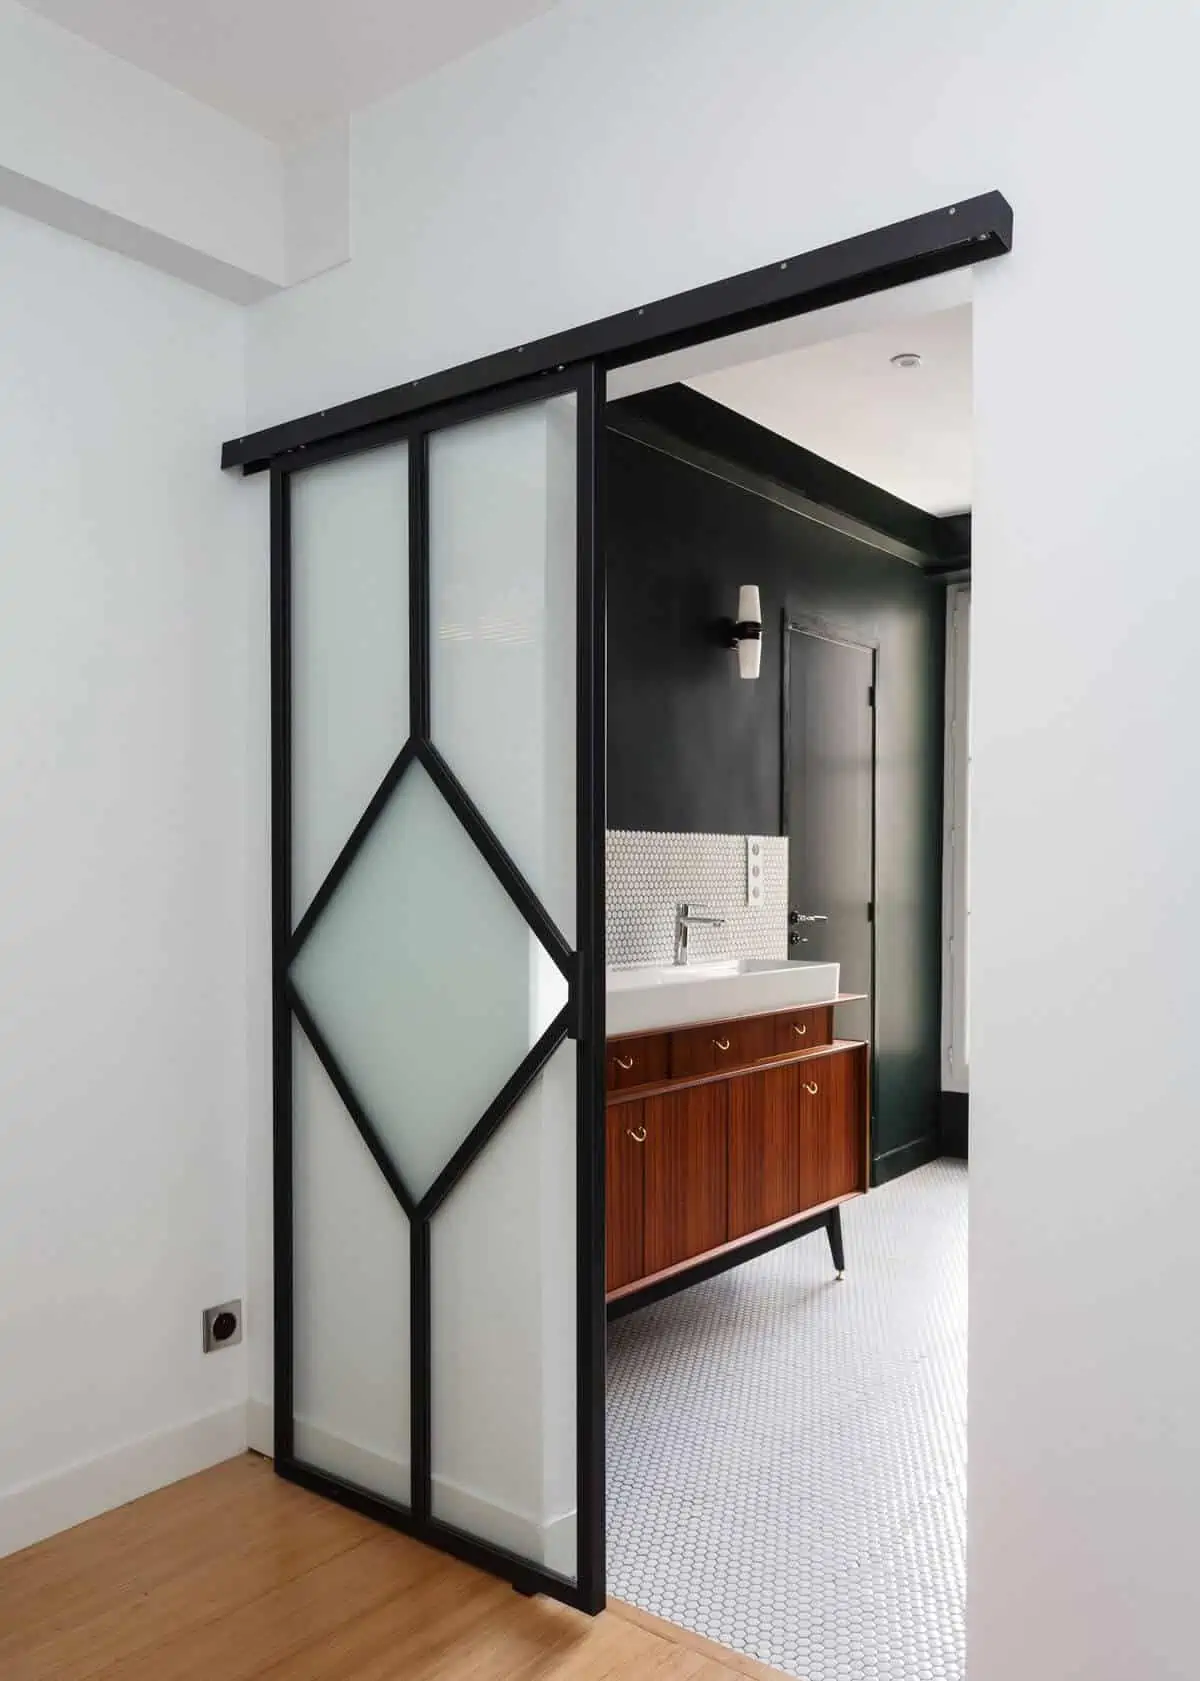 A frosted glass gate in a bathroom with washbasin and cabinets